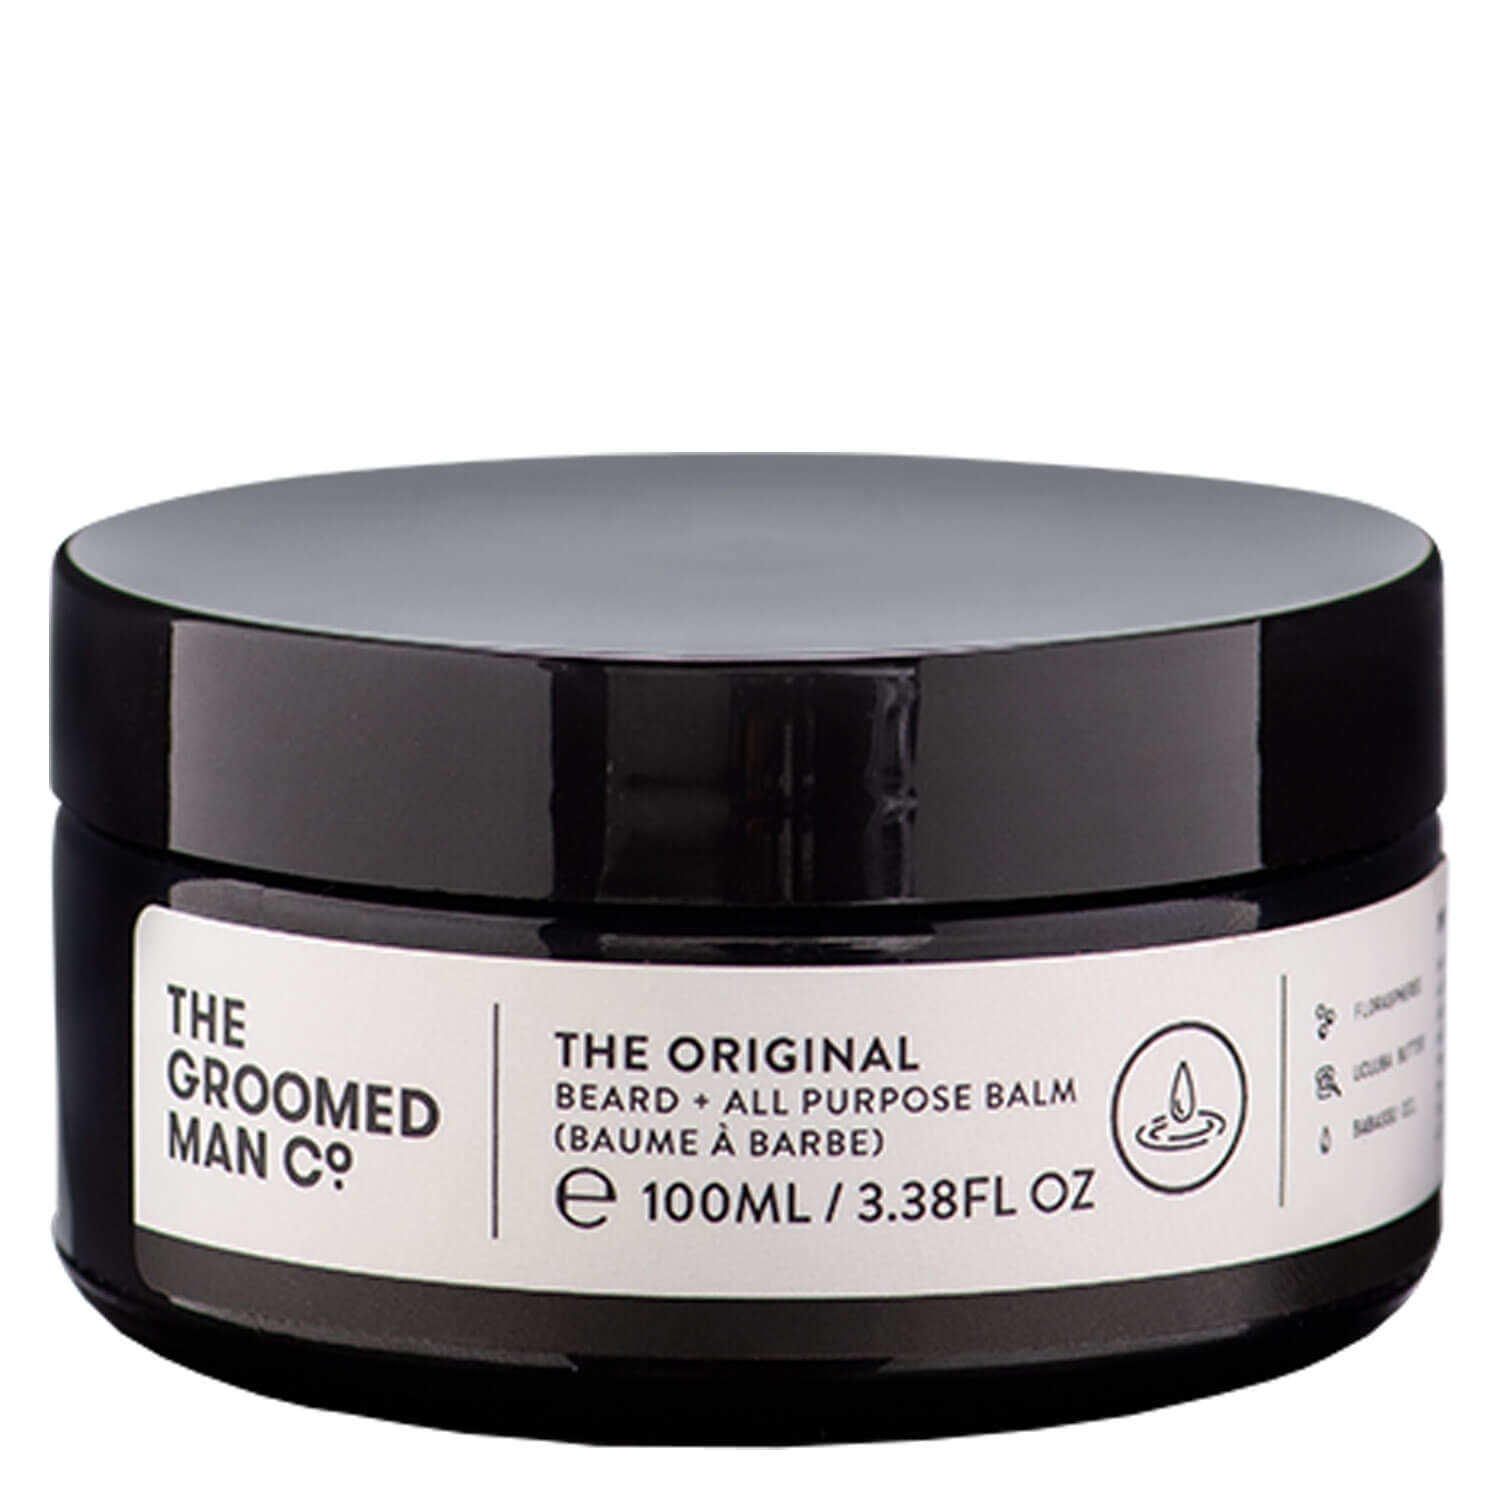 Product image from THE GROOMED MAN CO. - The Original Beard Balm